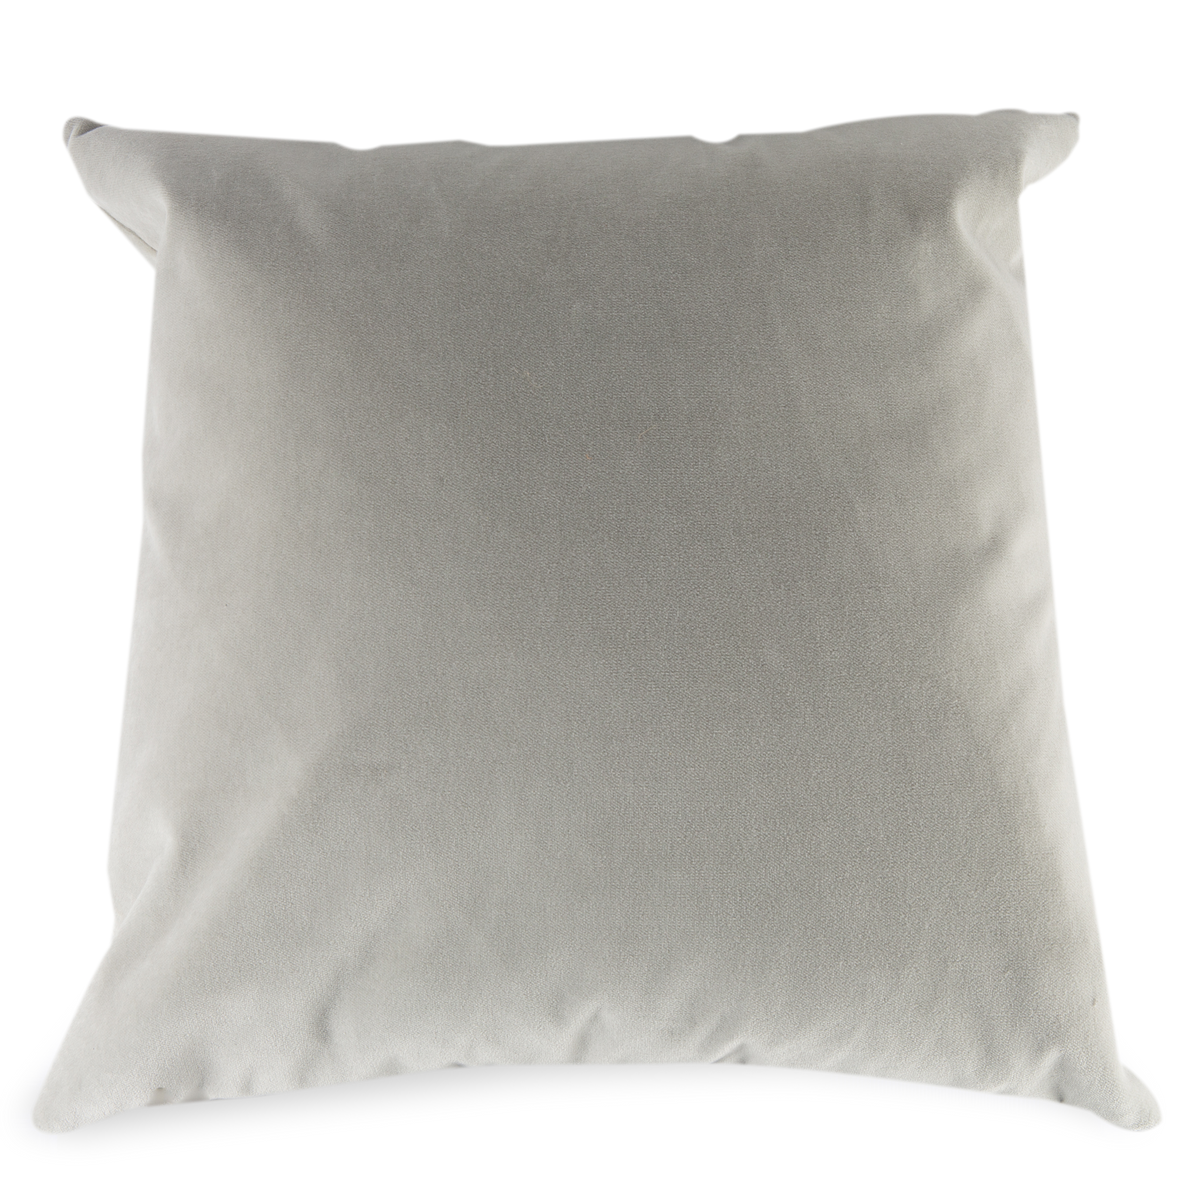 The Como Velvet Pillow is cotton velvet with a smooth texture and a lustrous finish.